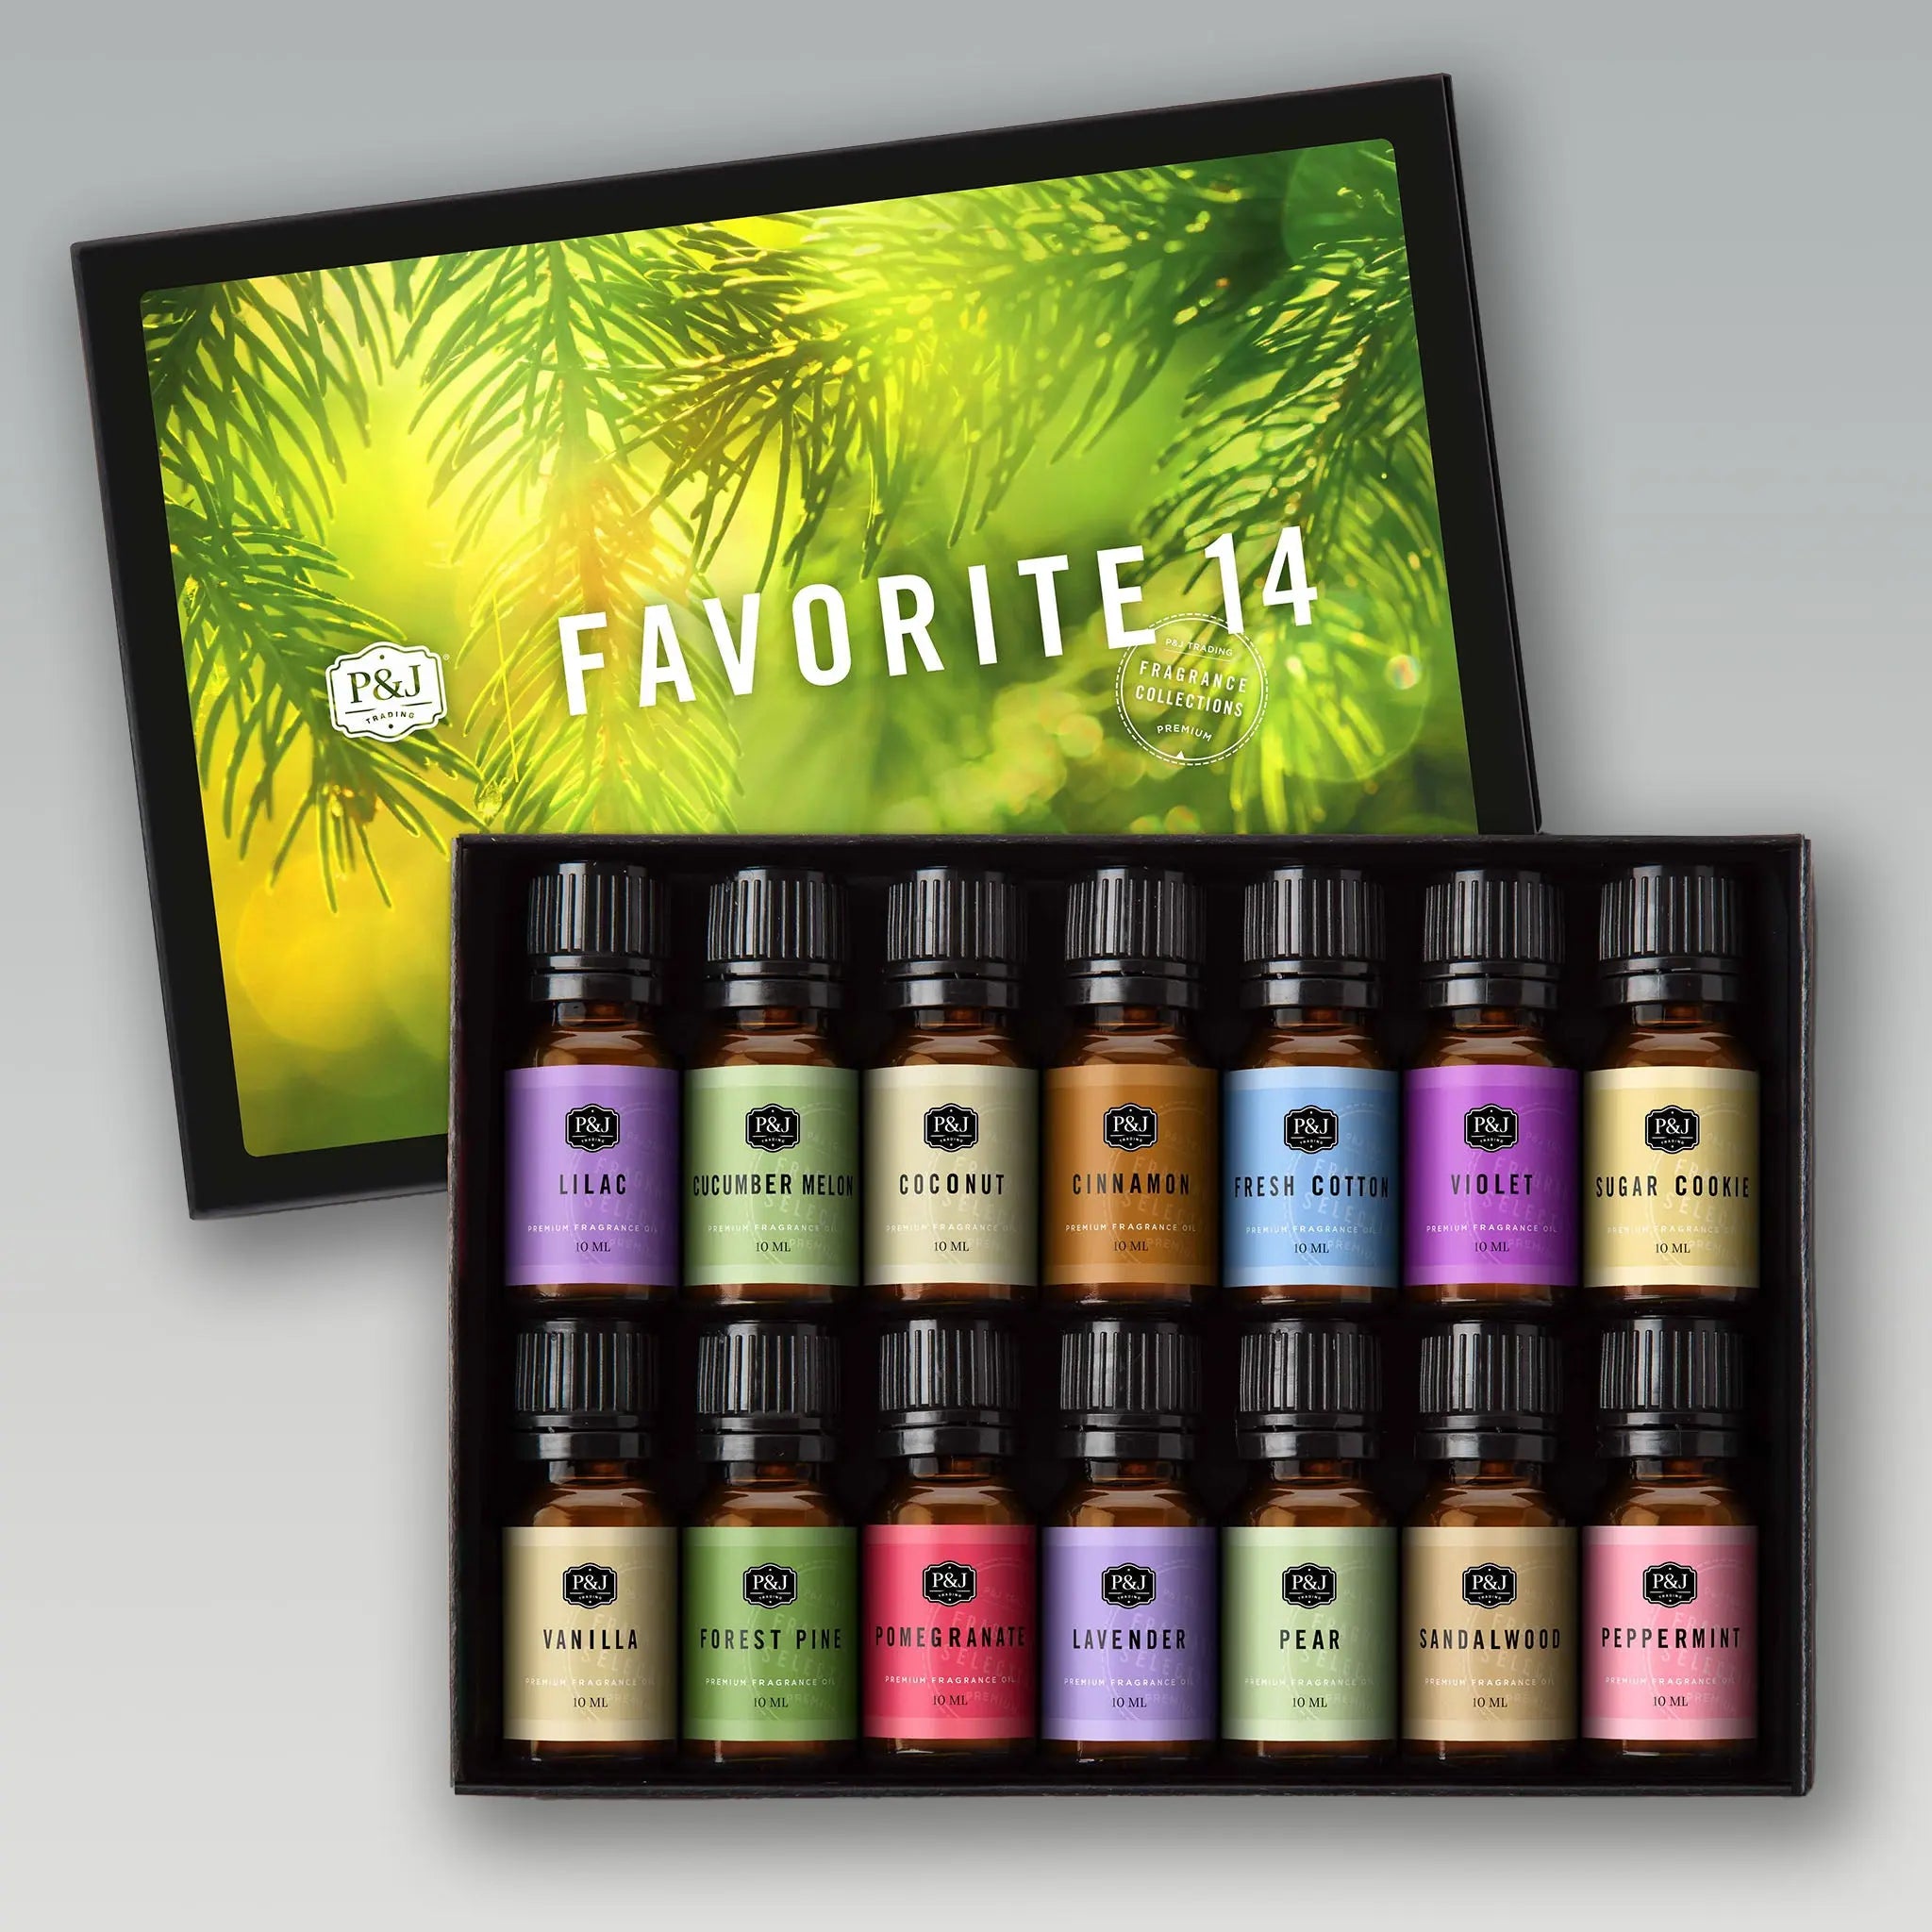  P&J Fragrance Favorites Set  Strawberry, Lilac, Cucumber  Melon, Coconut, Gardenia, Woodbine Scents for Candle, Soap & Diffuser Oil  Making : Books